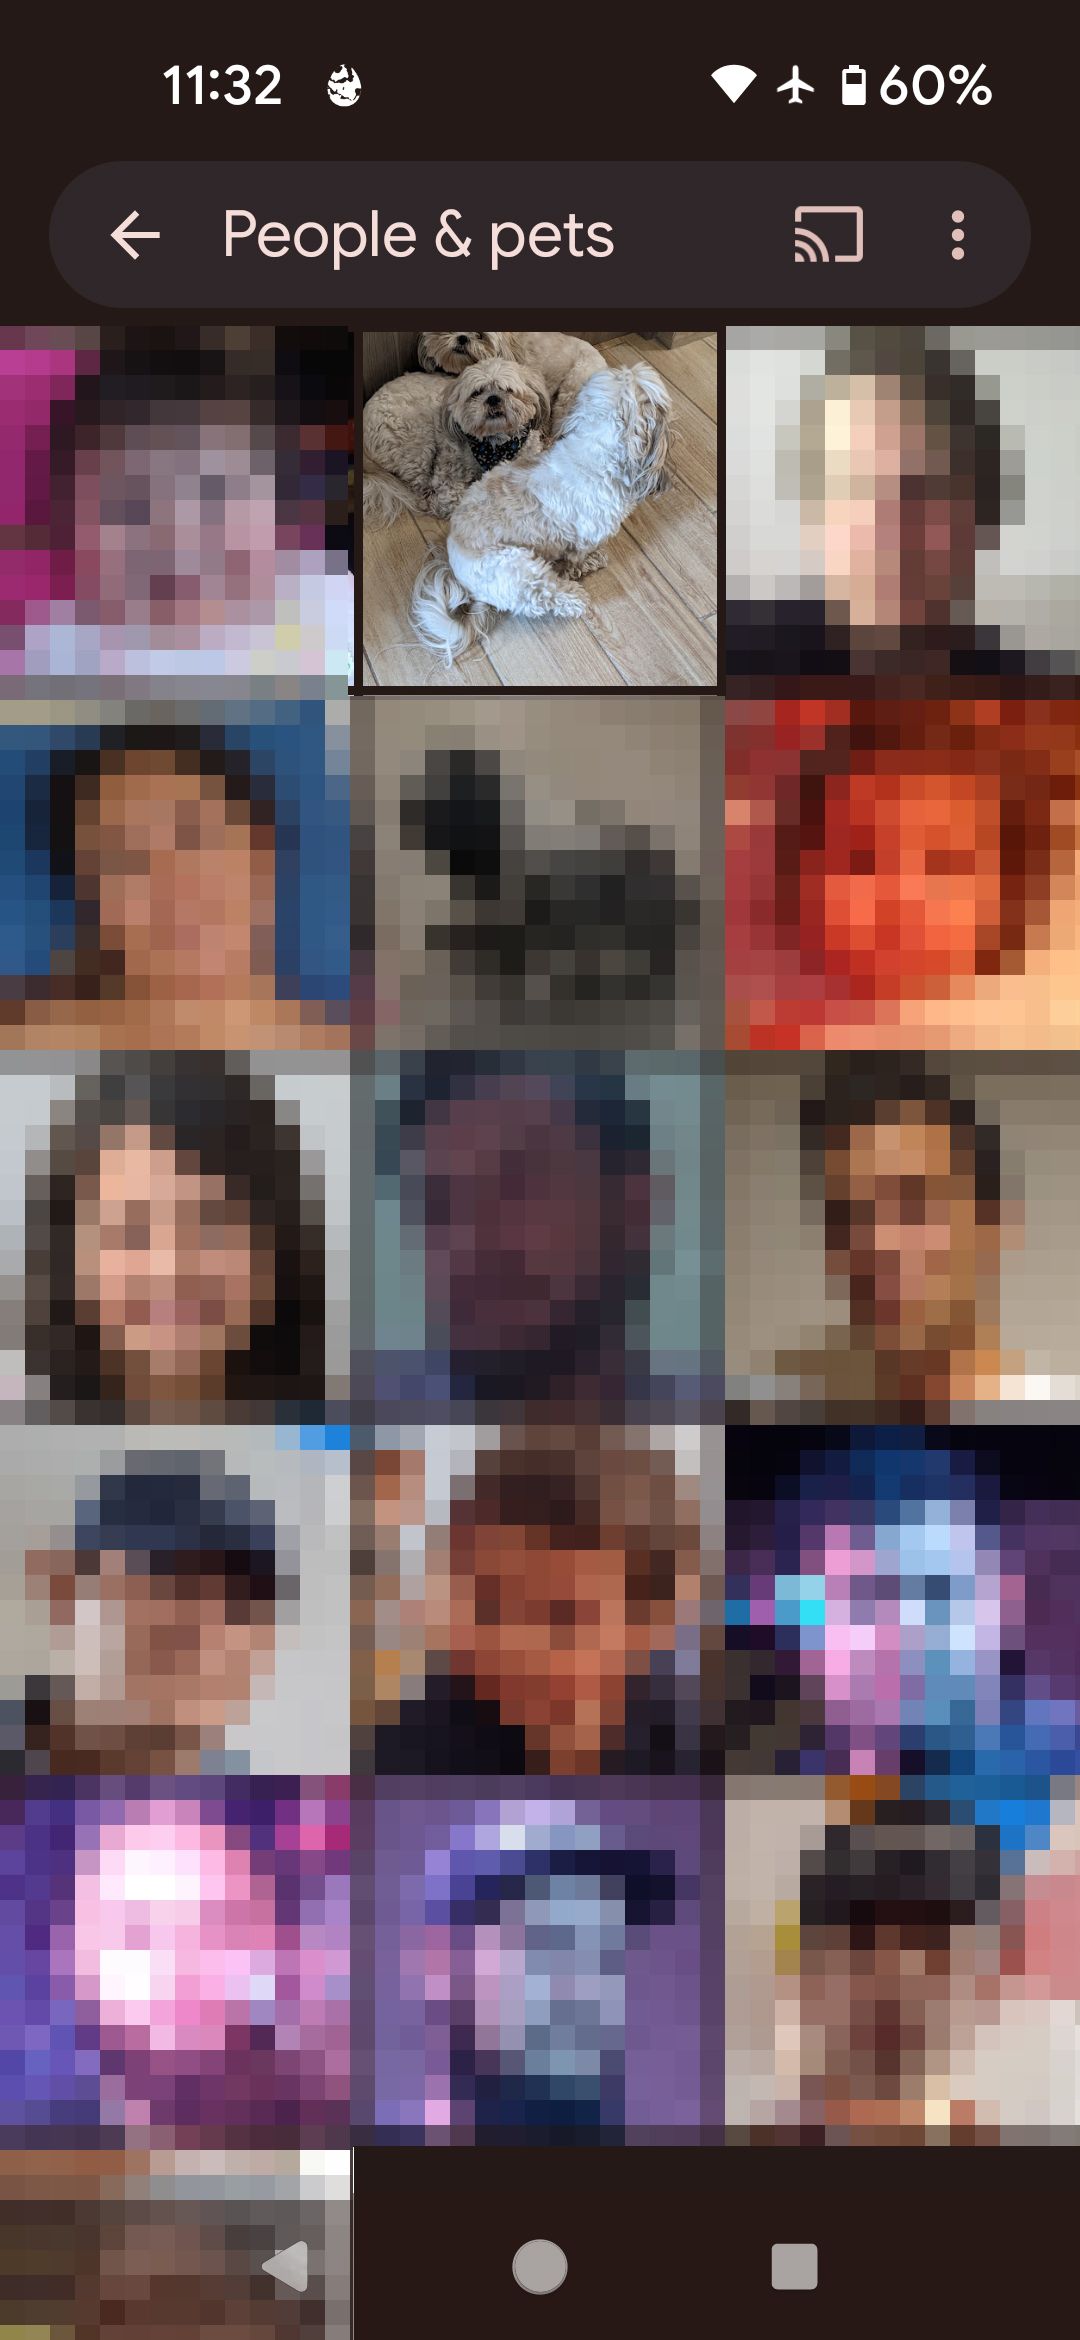 People section of the Search menu on the Google Photos app